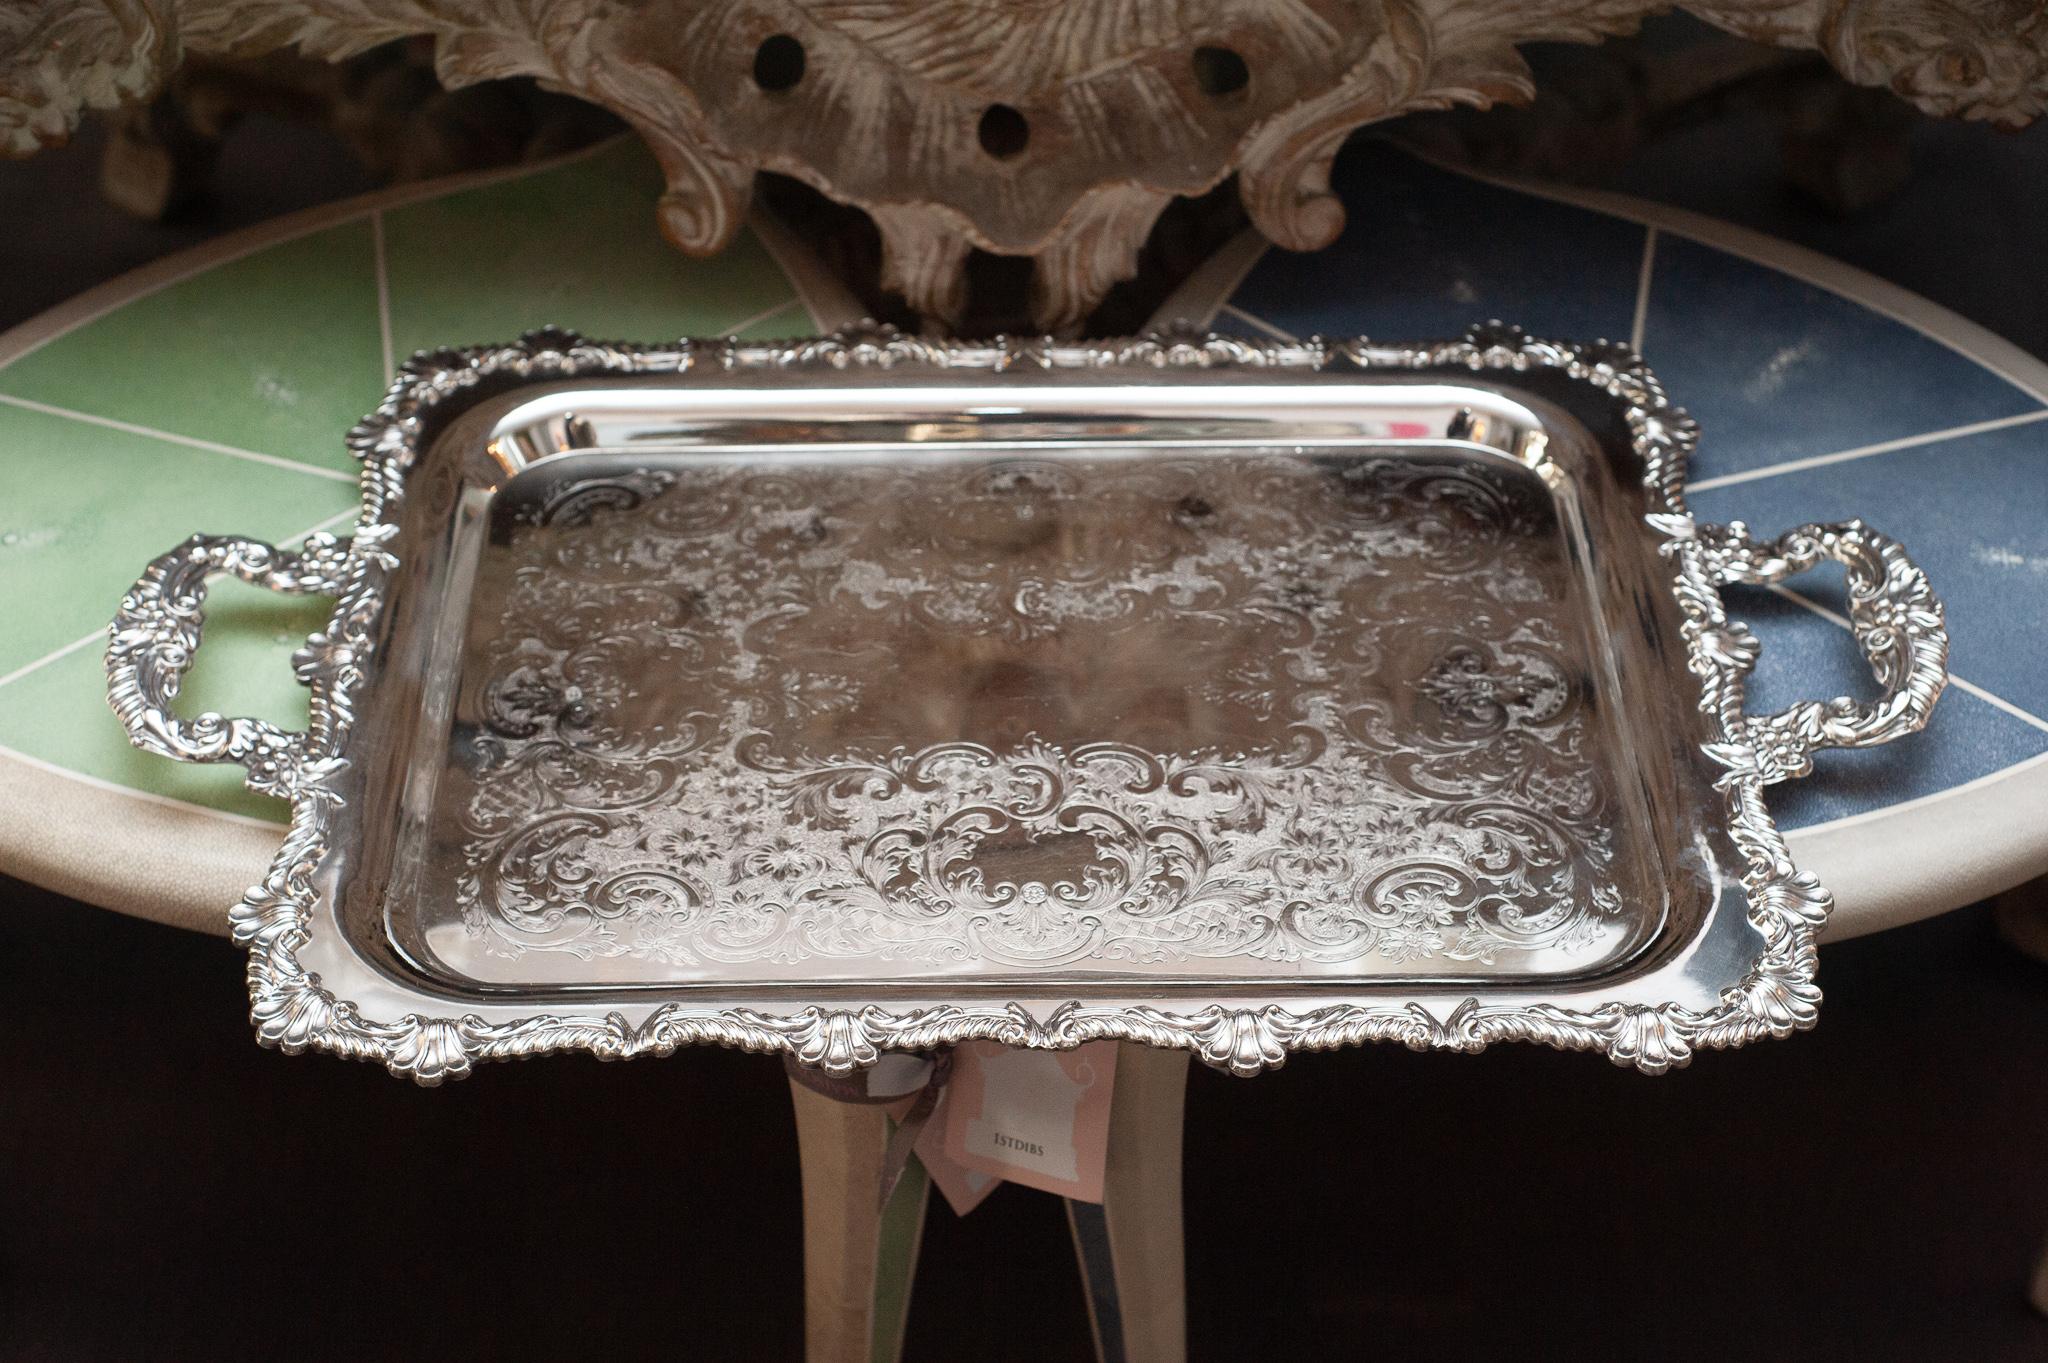 An antique large Rideau silver plate rectangular serving tray with engraving interior and ornate border with handles.